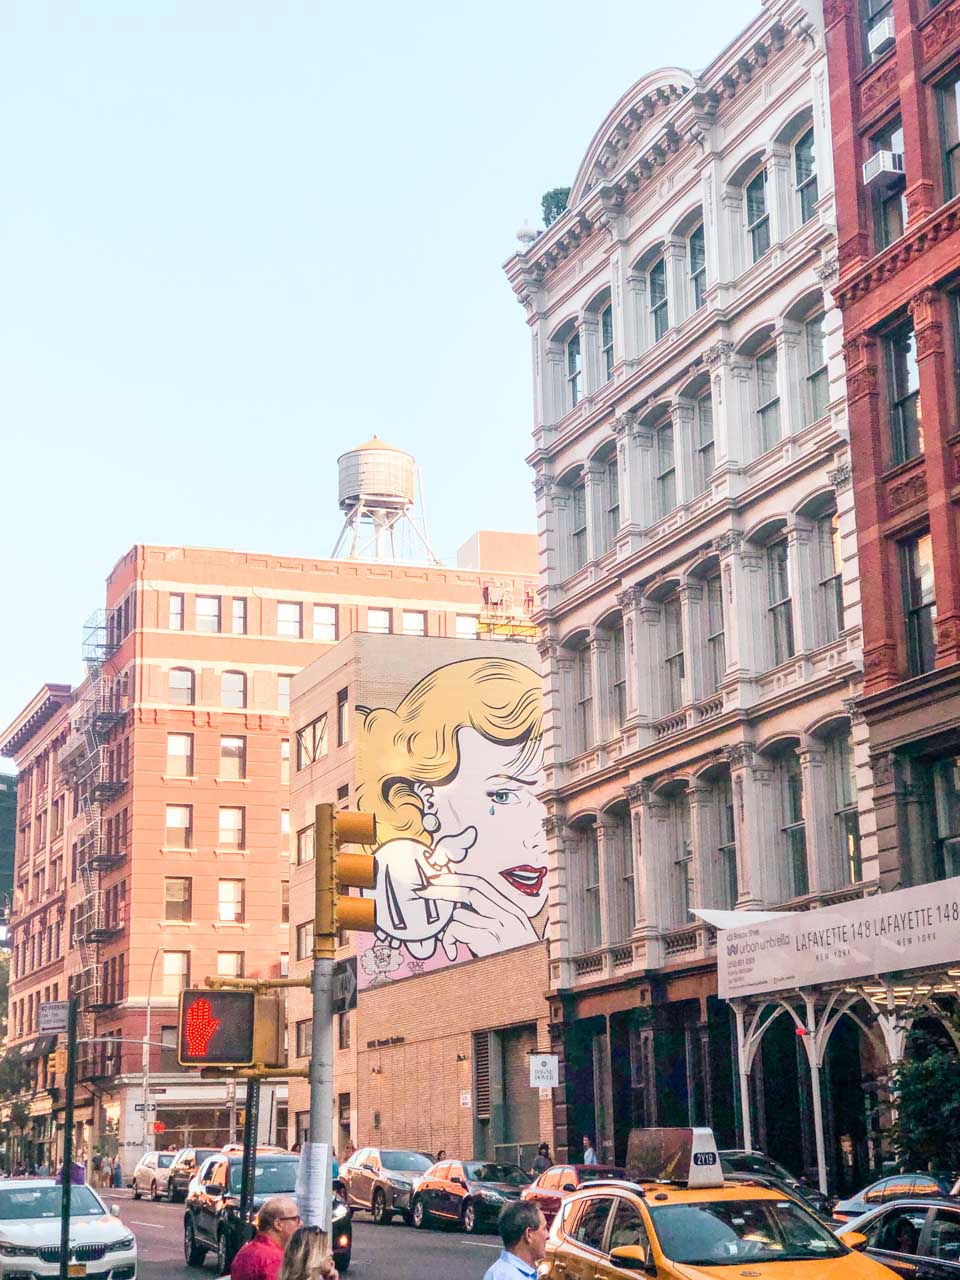 A pop art crying woman mural in Broome Street, New York